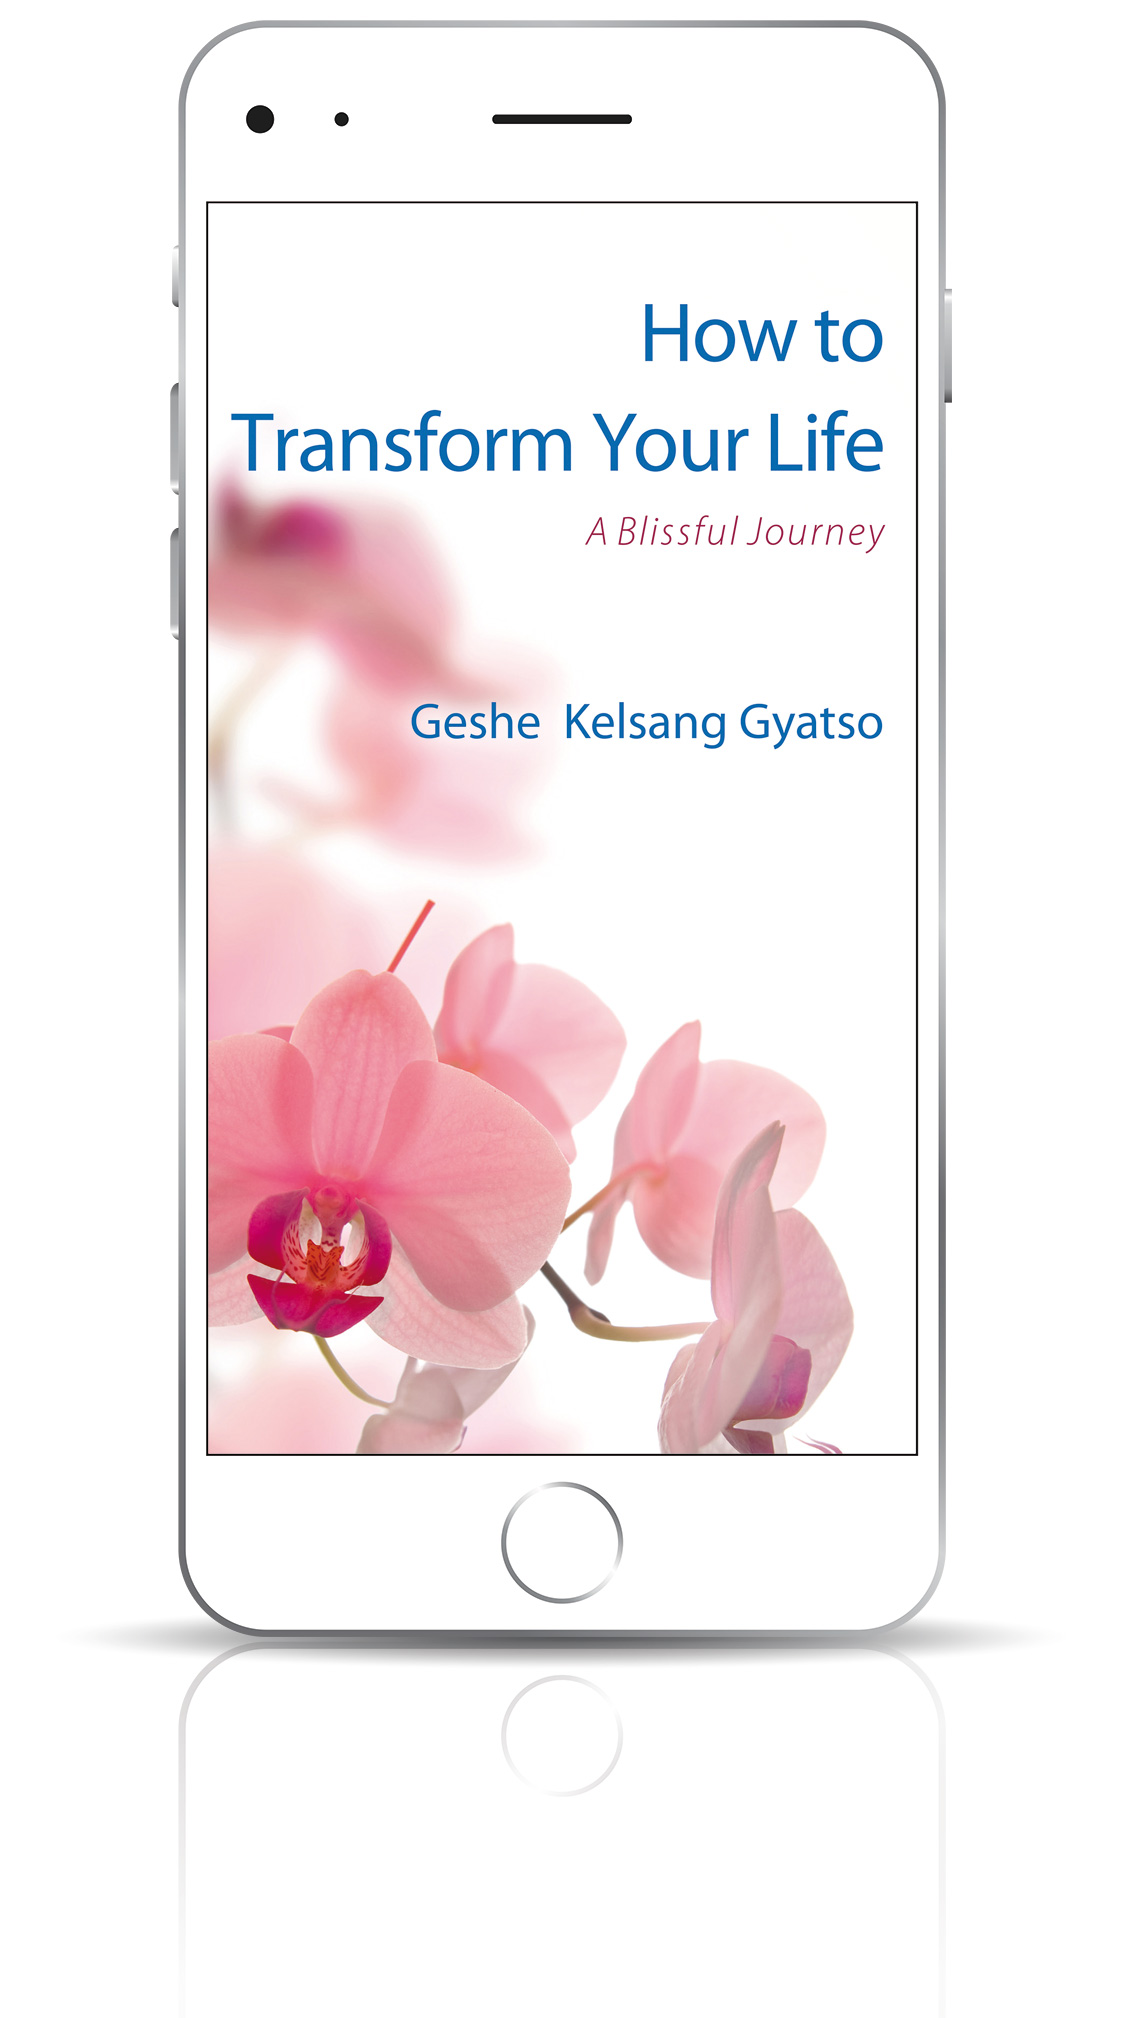 How to Transform Your Life, available as a free eBook download